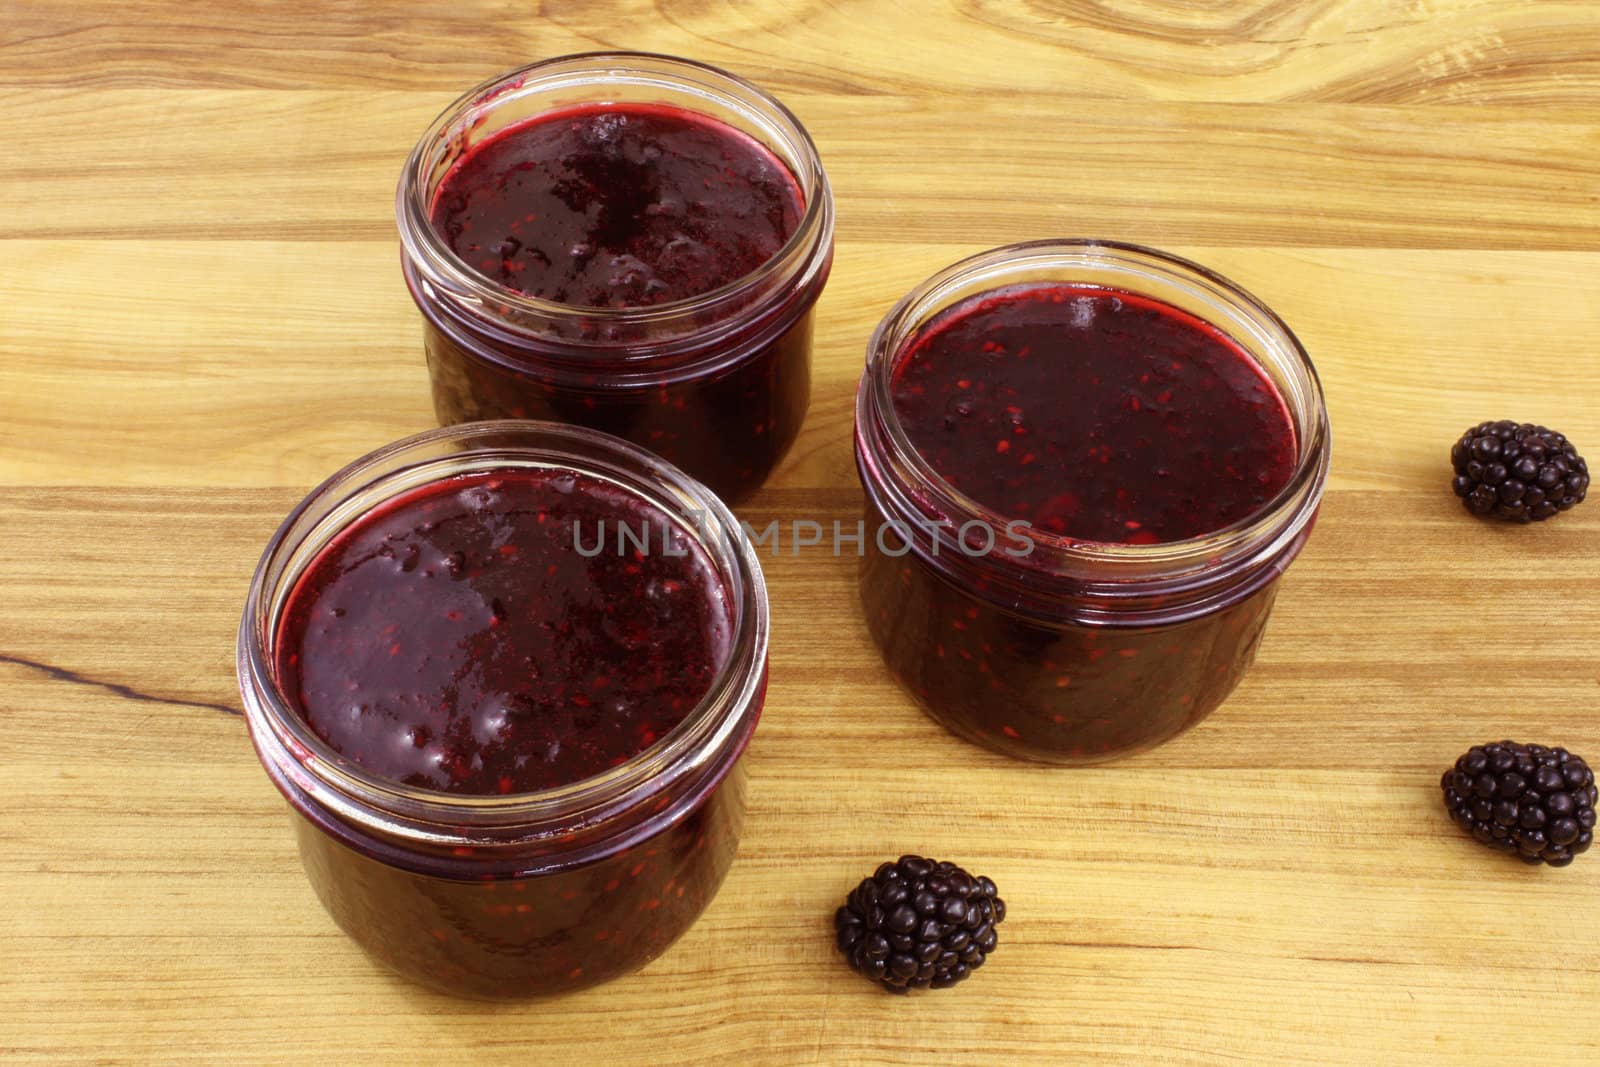 Three jars of home-made blackberry jam and three blackberries on a wooden countertop.